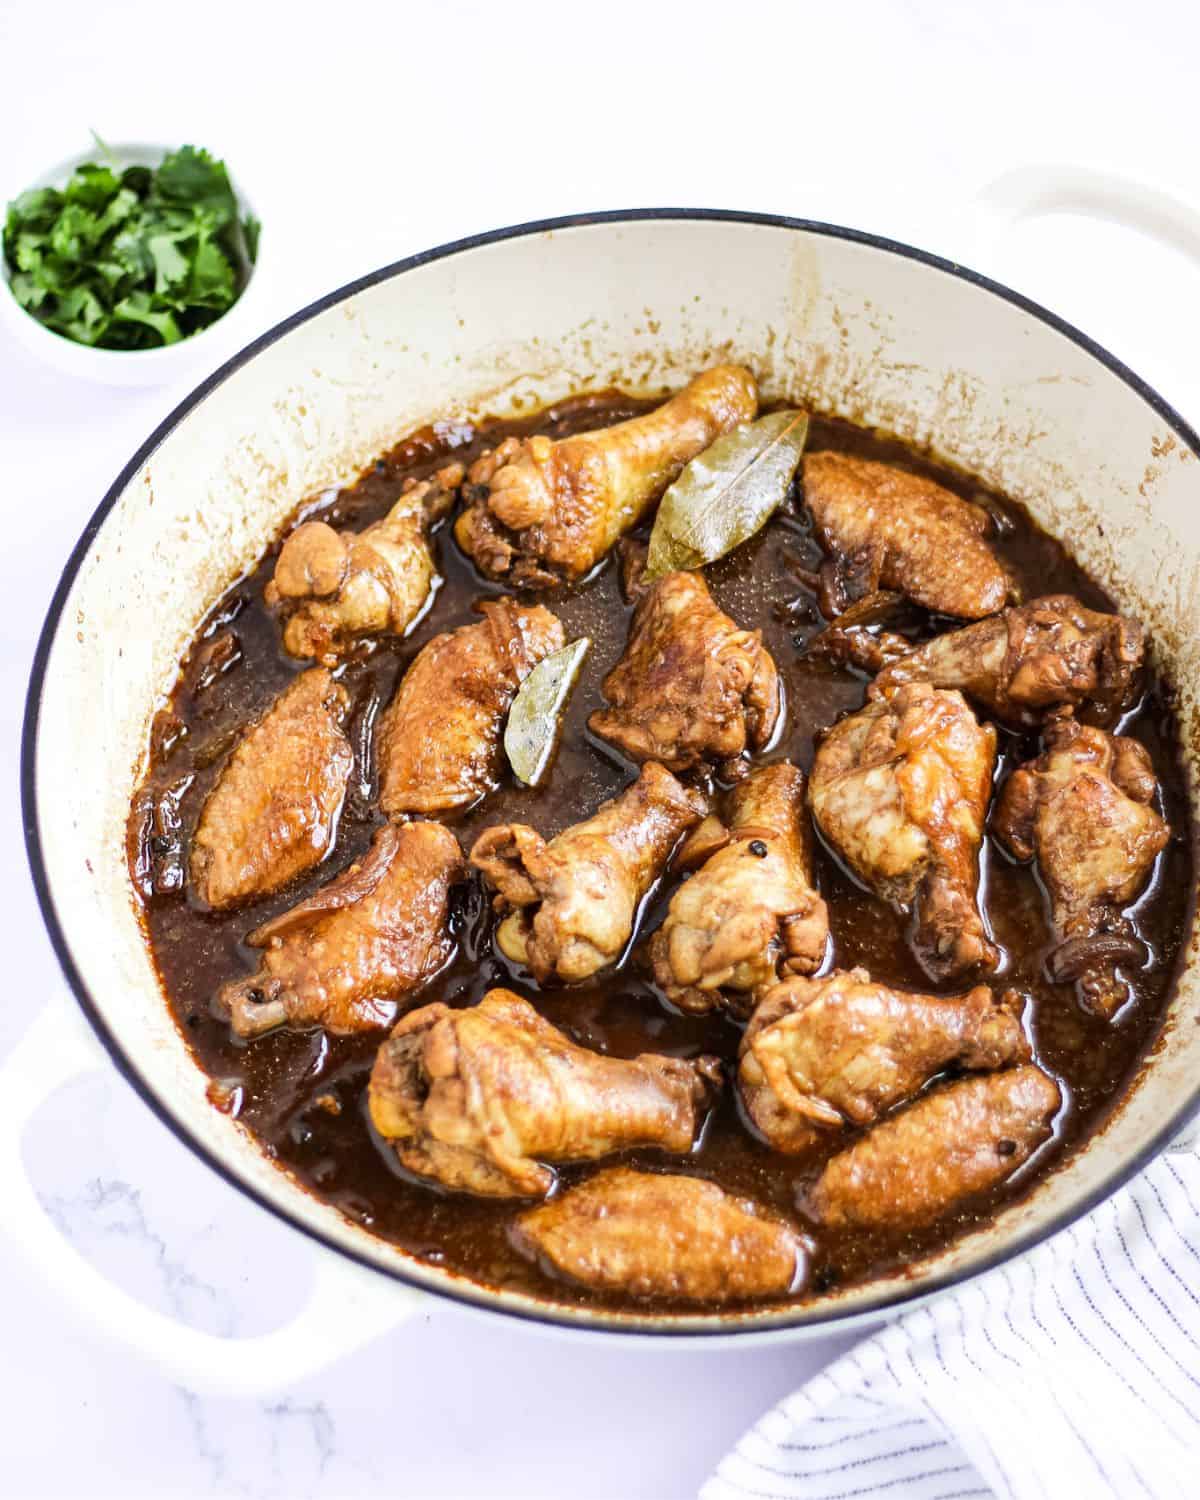 Finish dish of chicken adobo in a skillet ready to serve.